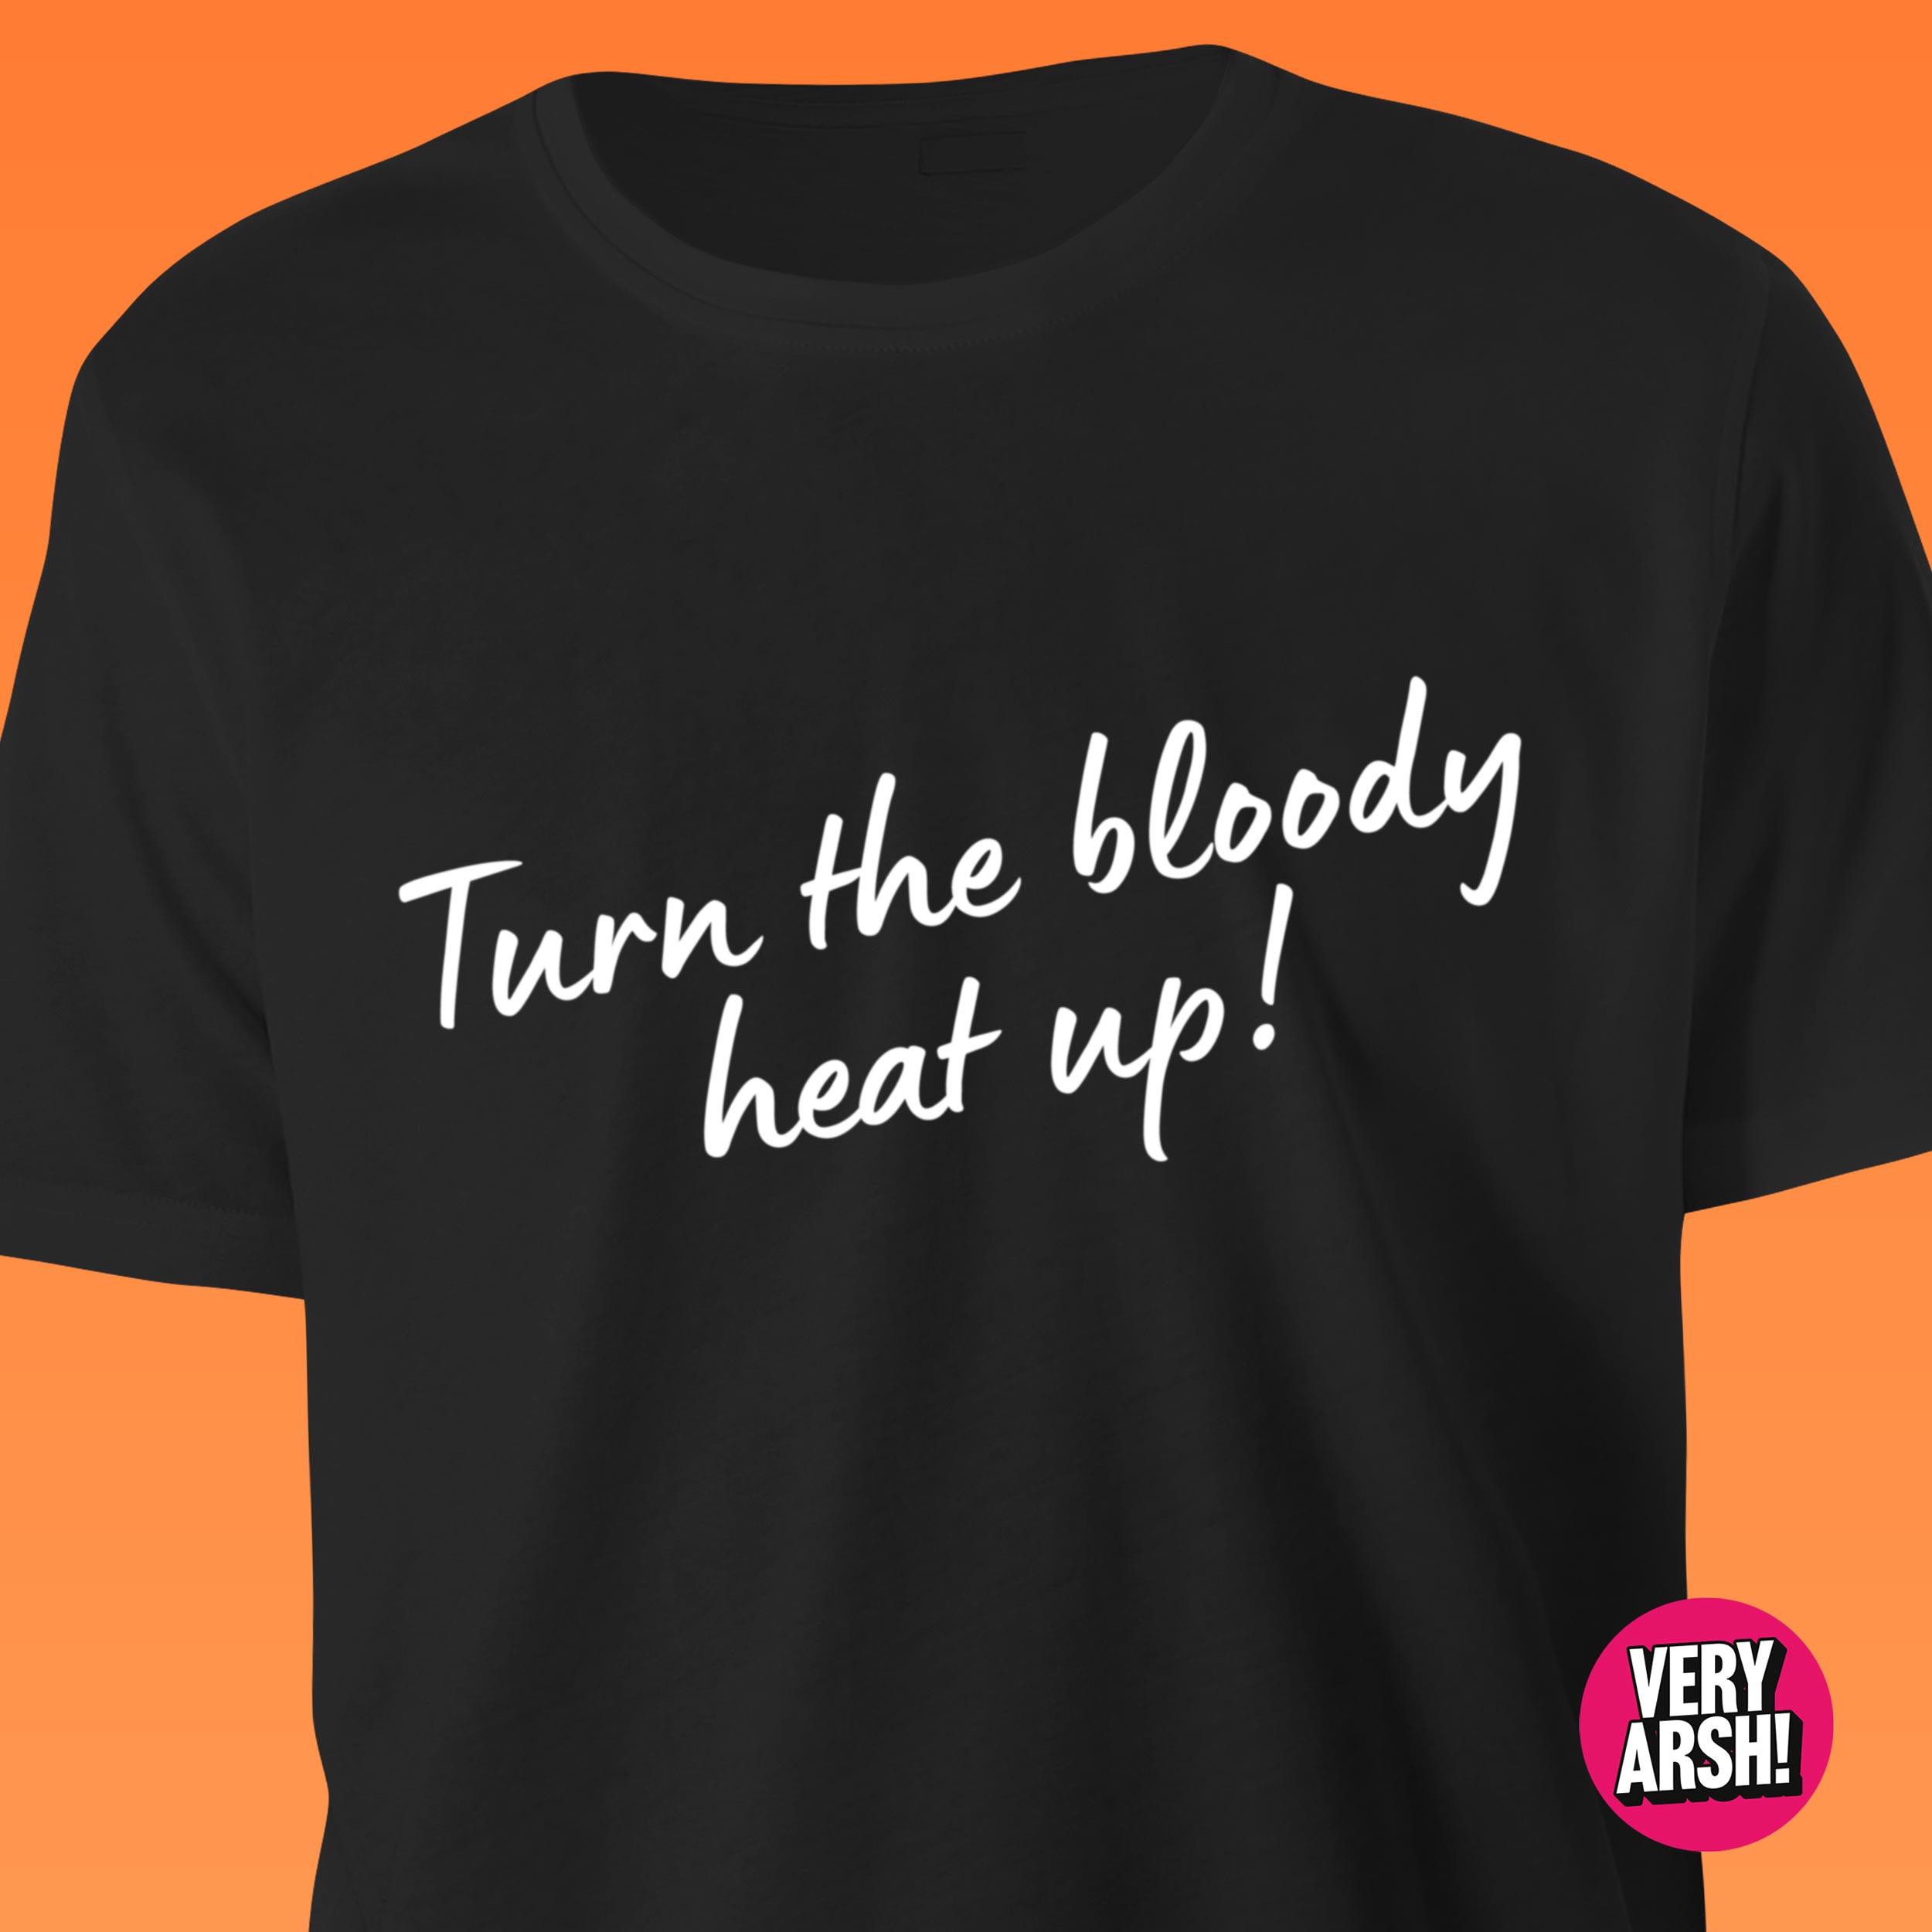 Turn the bloody heat up! - Charity Shop Sue inspired T-Shirt in Black